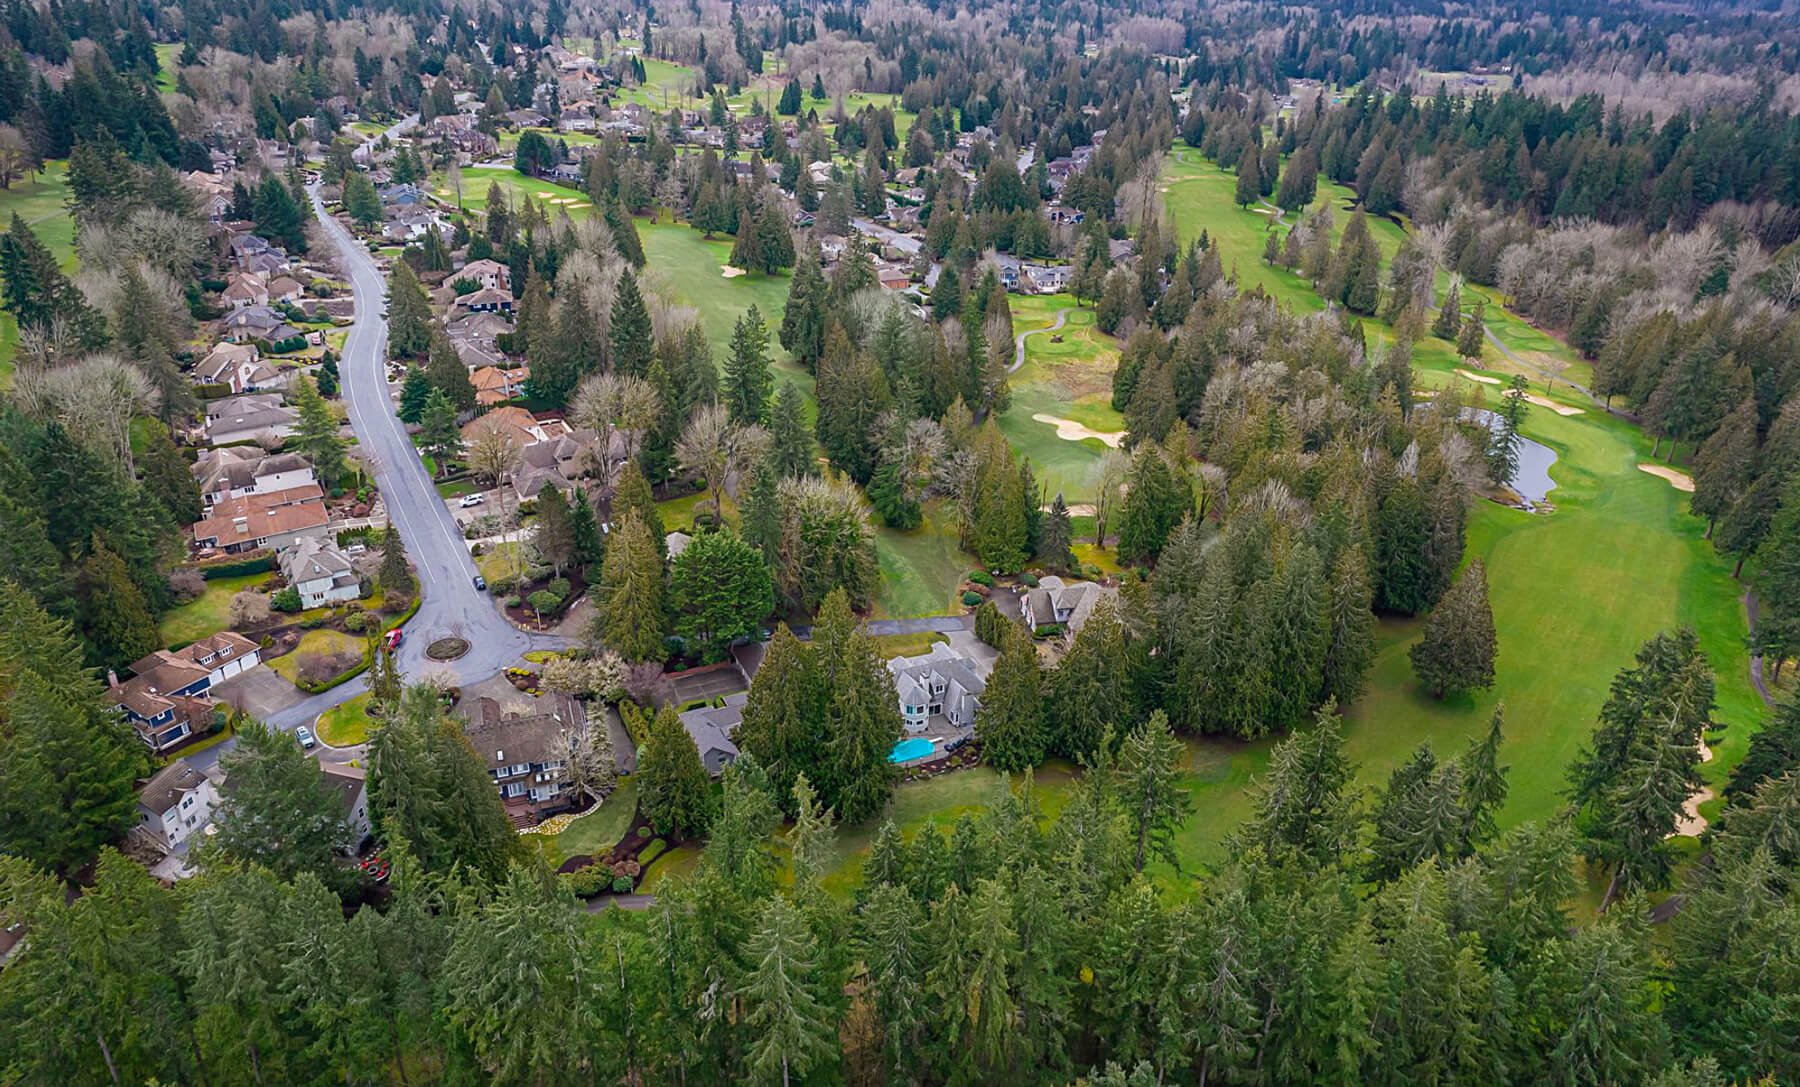 BEAR-CREEK-COUNTRY-CLUB-DRONE GOLF COURSE AND HOMES